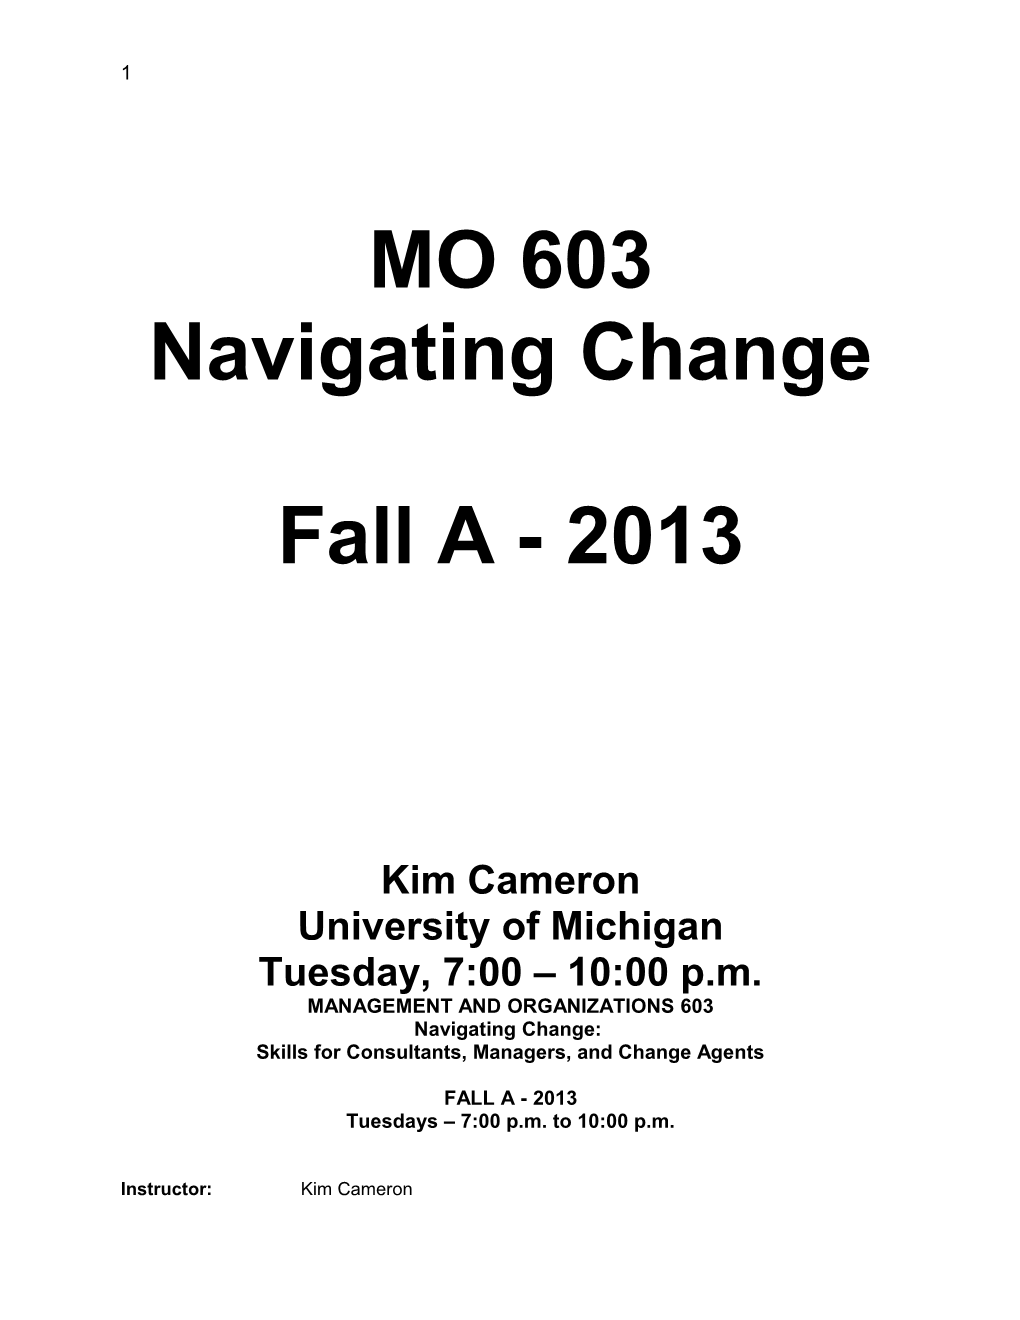 Management and Organizations 603